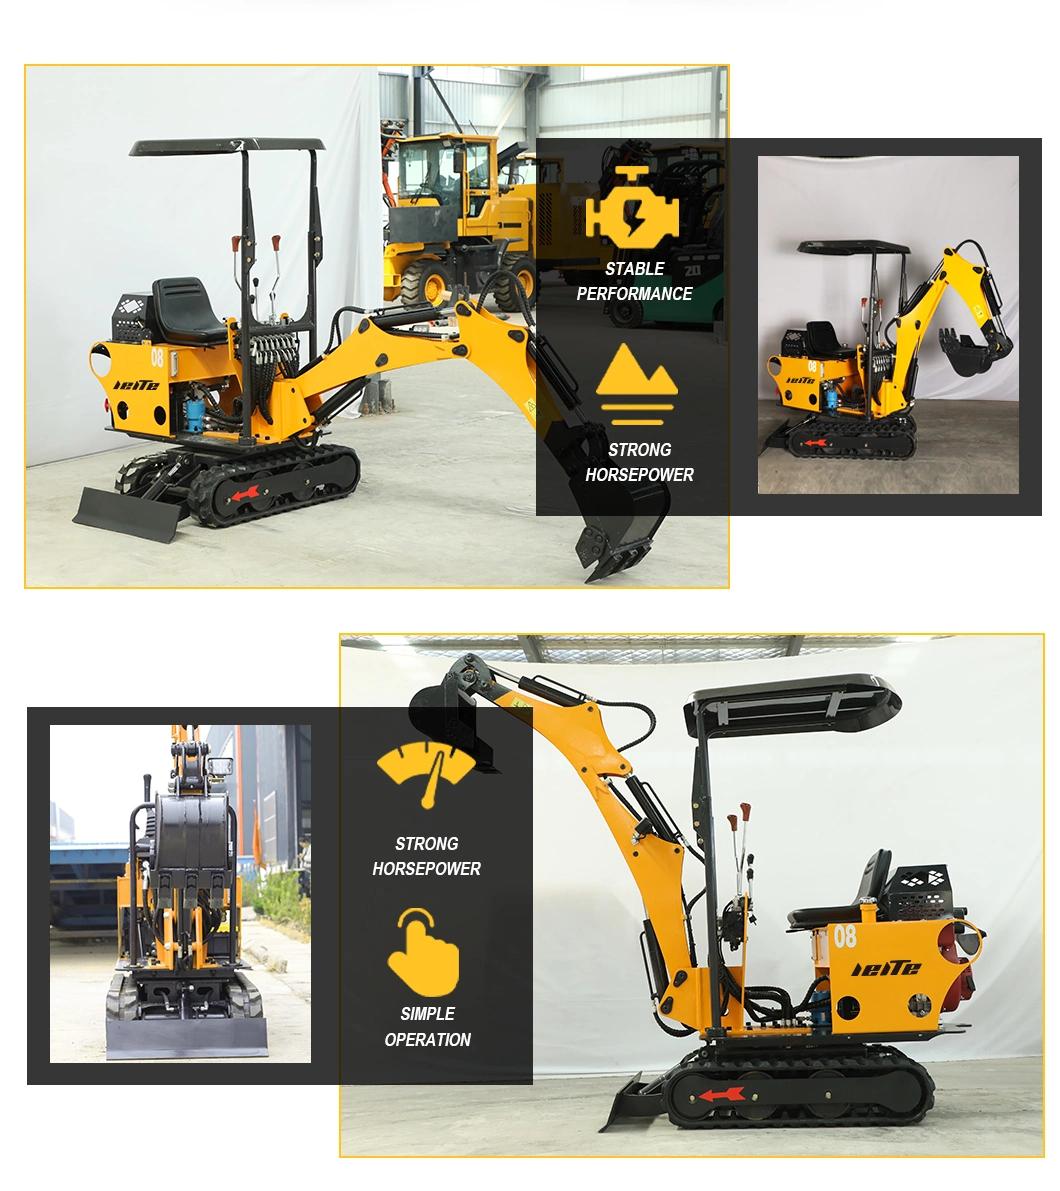 The Price of Manufacturer 800kg Mini Excavator with Yanmar Japan Machinery Video Technical Support Online Support